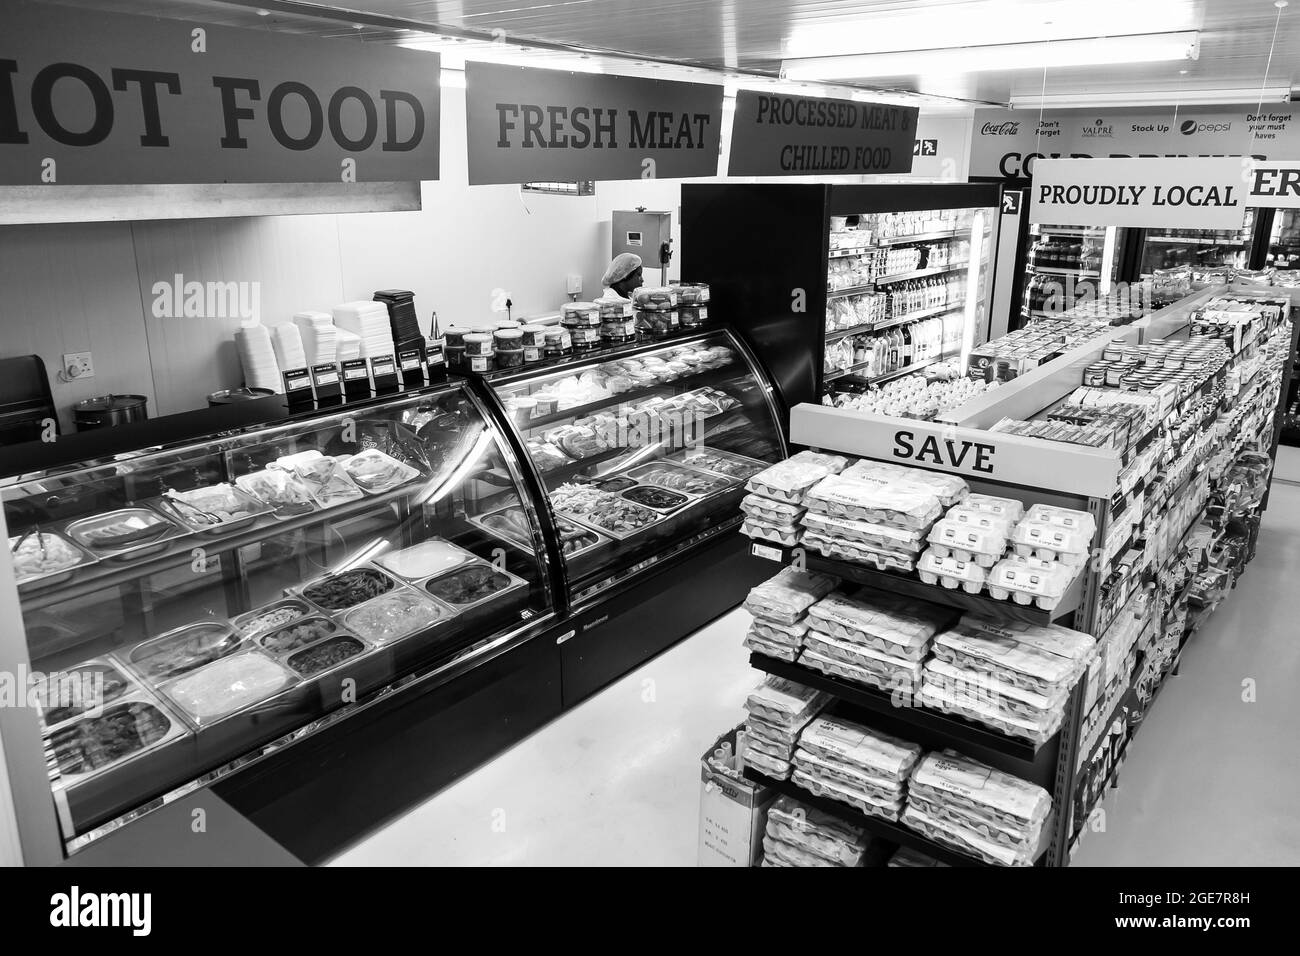 JOHANNESBURG, SOUTH AFRICA - Jan 06, 2021: A fully stocked shelves of food and household items at Pick n Pay store in Soweto, South Africa Stock Photo